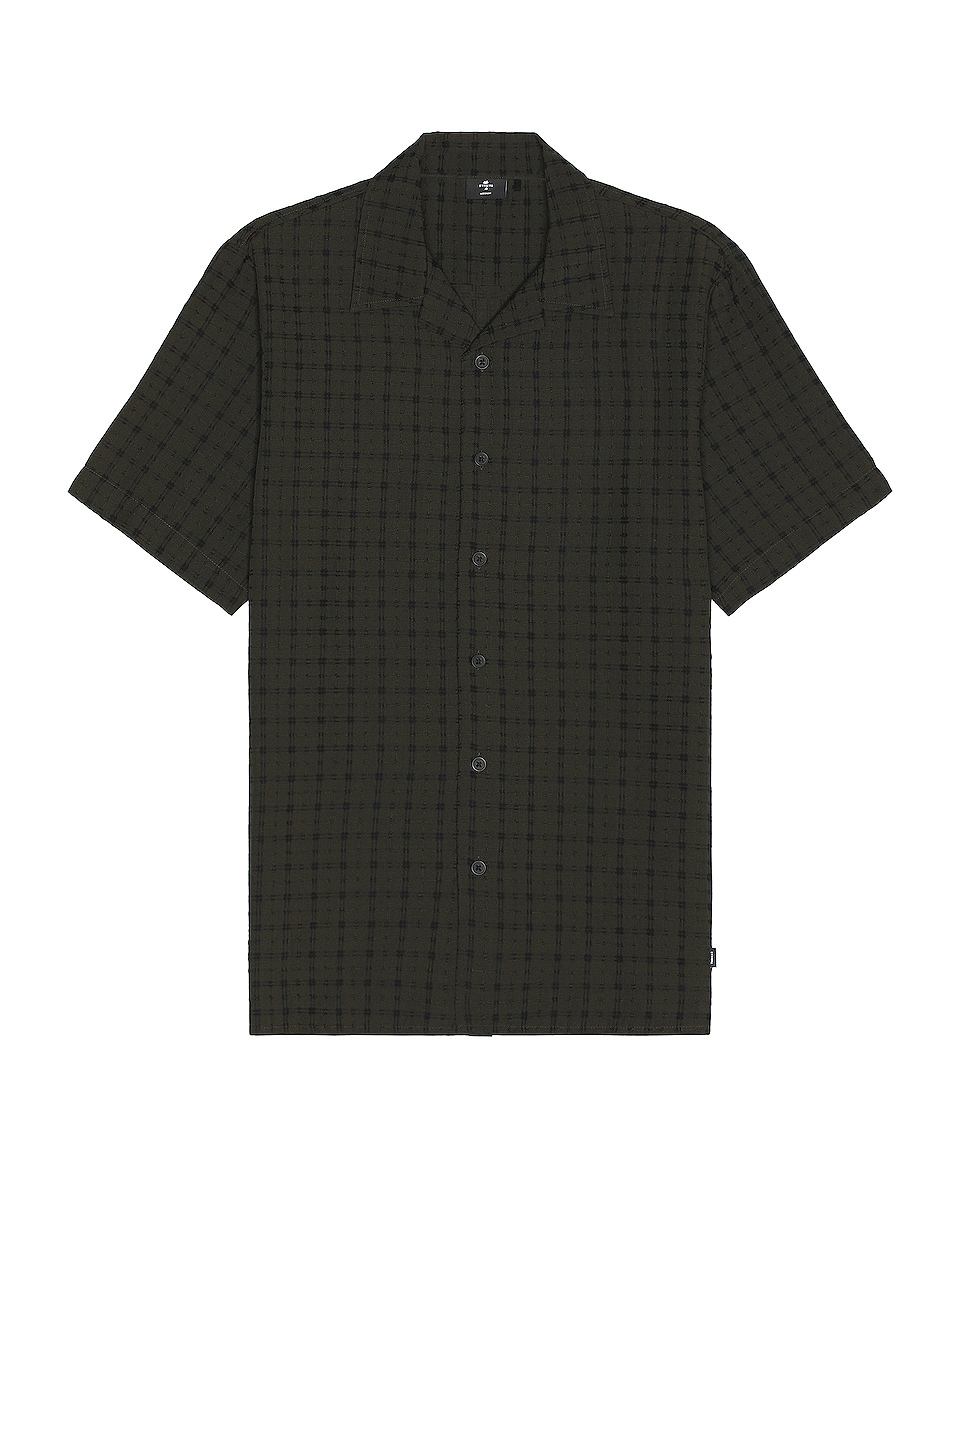 THRILLS Infinity Check Bowling Shirt in Oil Green | REVOLVE